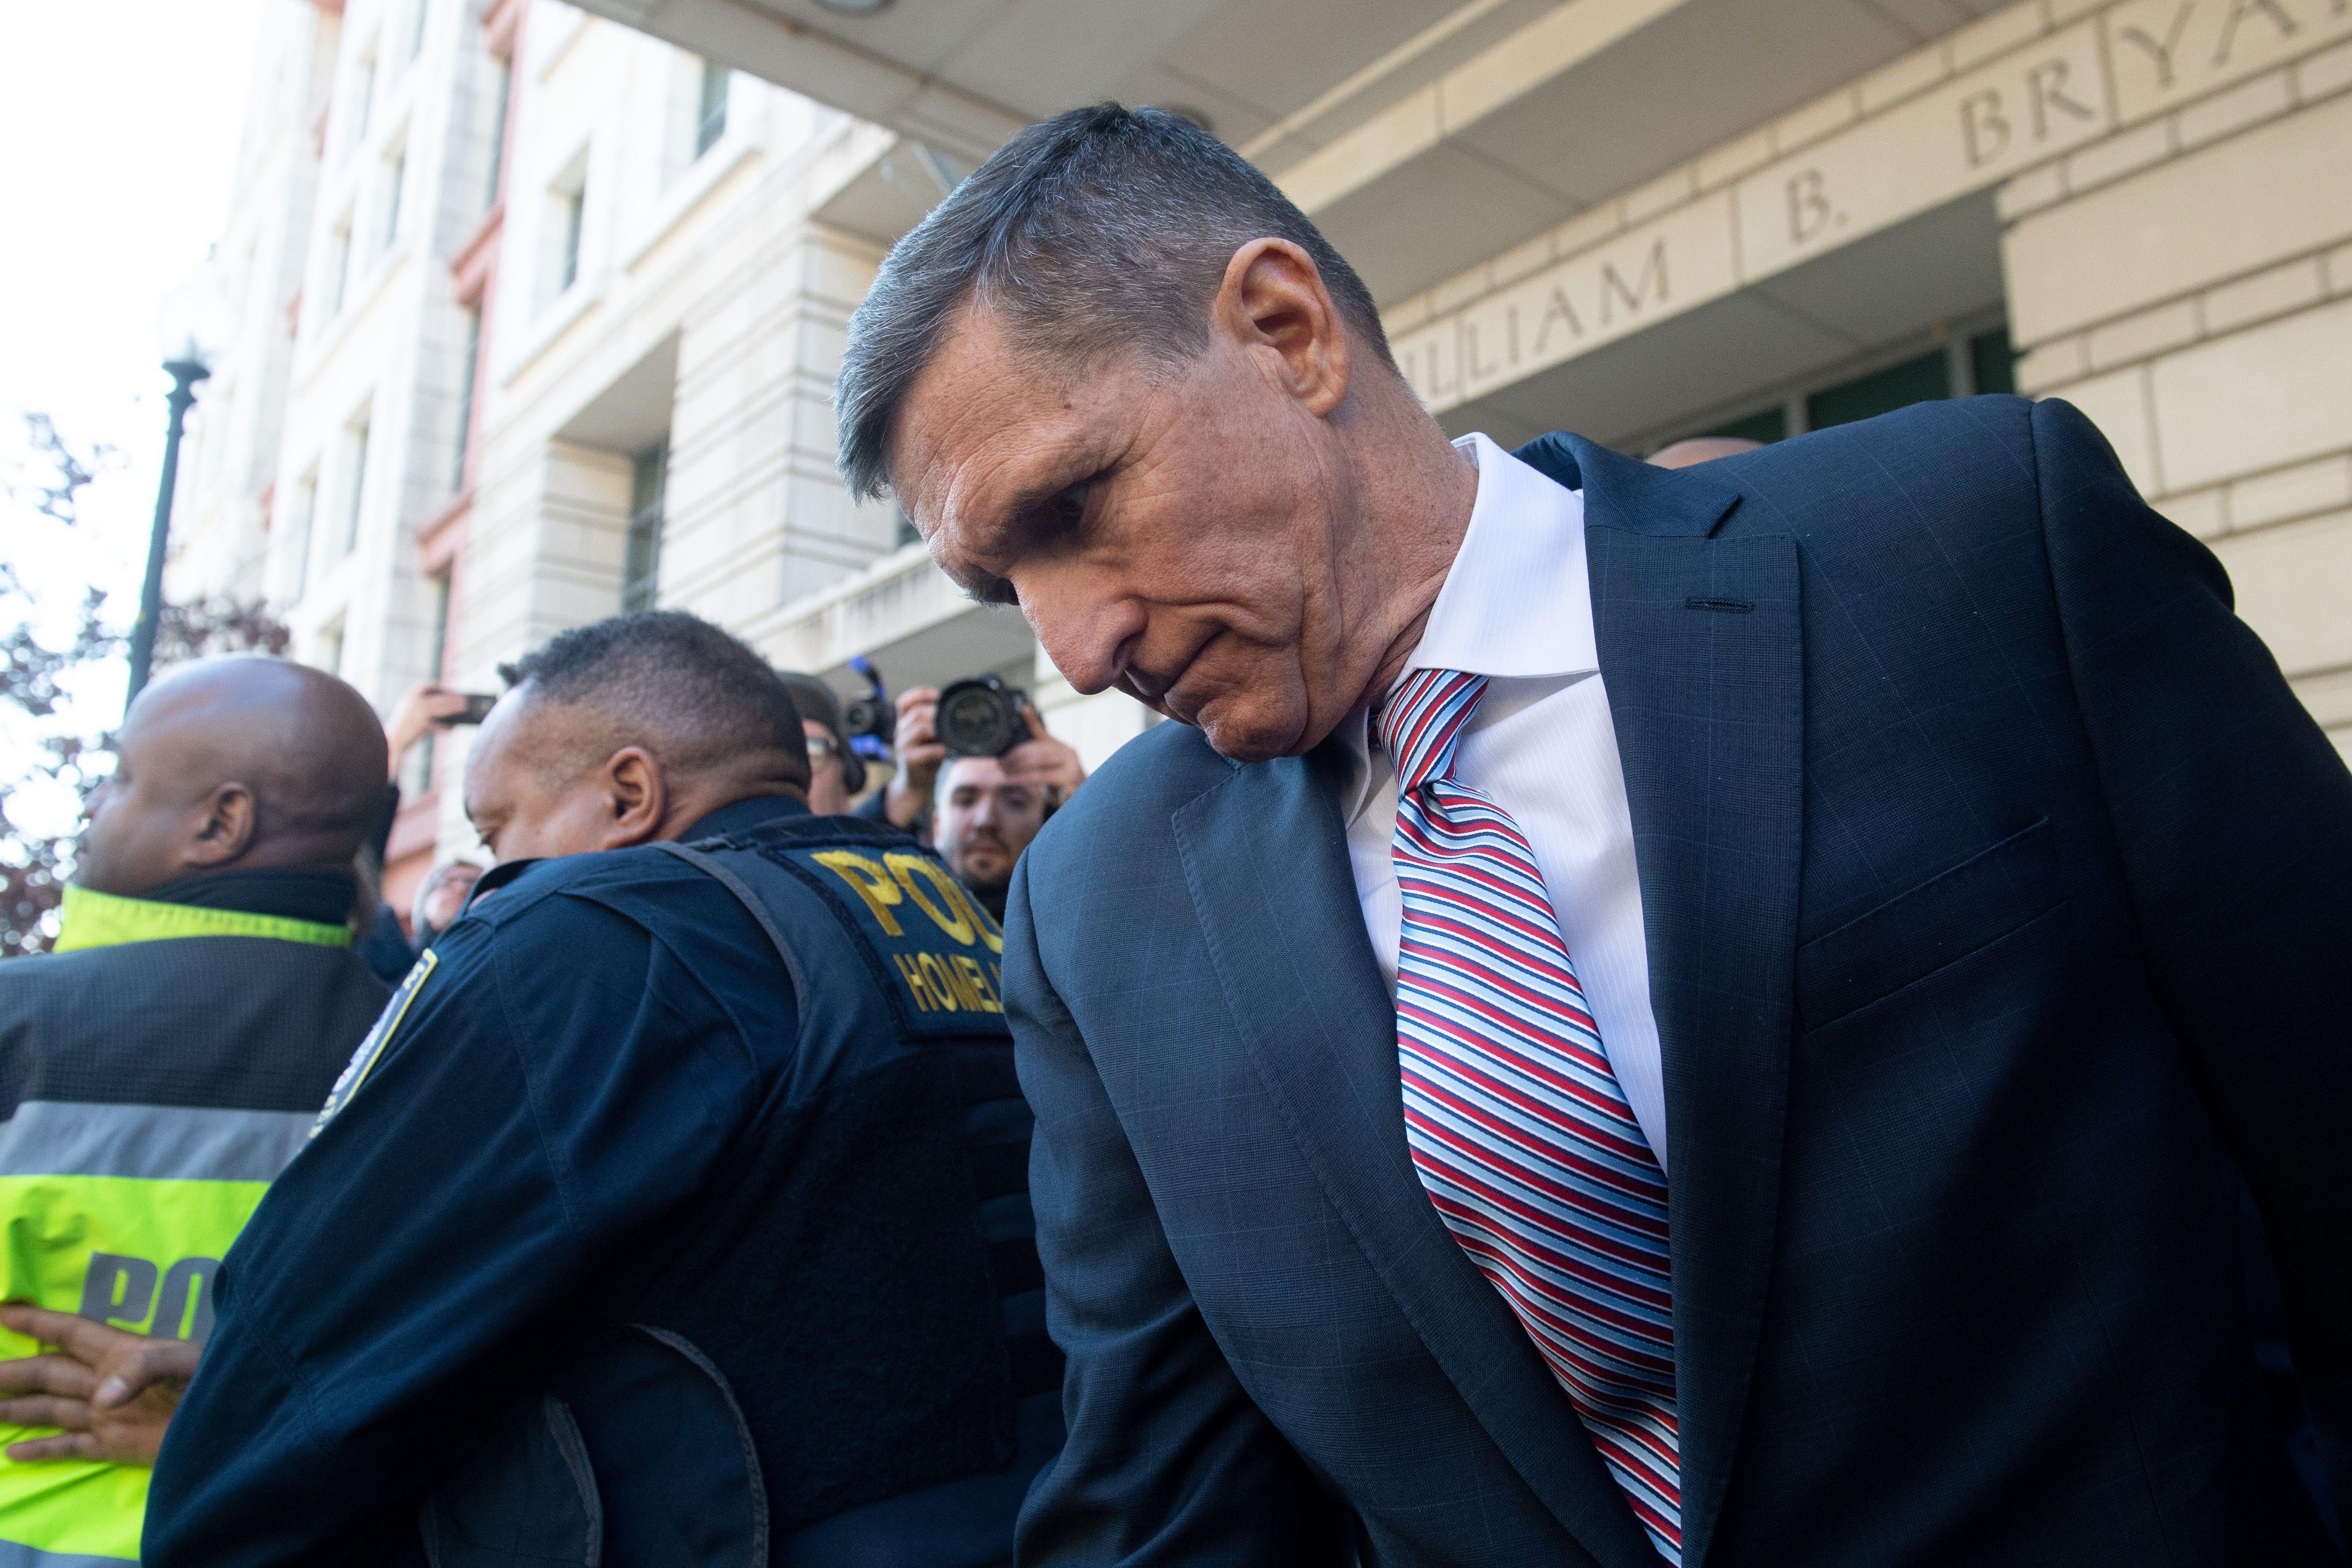 Michael Flynn looks down as he pushes through a crowd of reporters outside the court building.